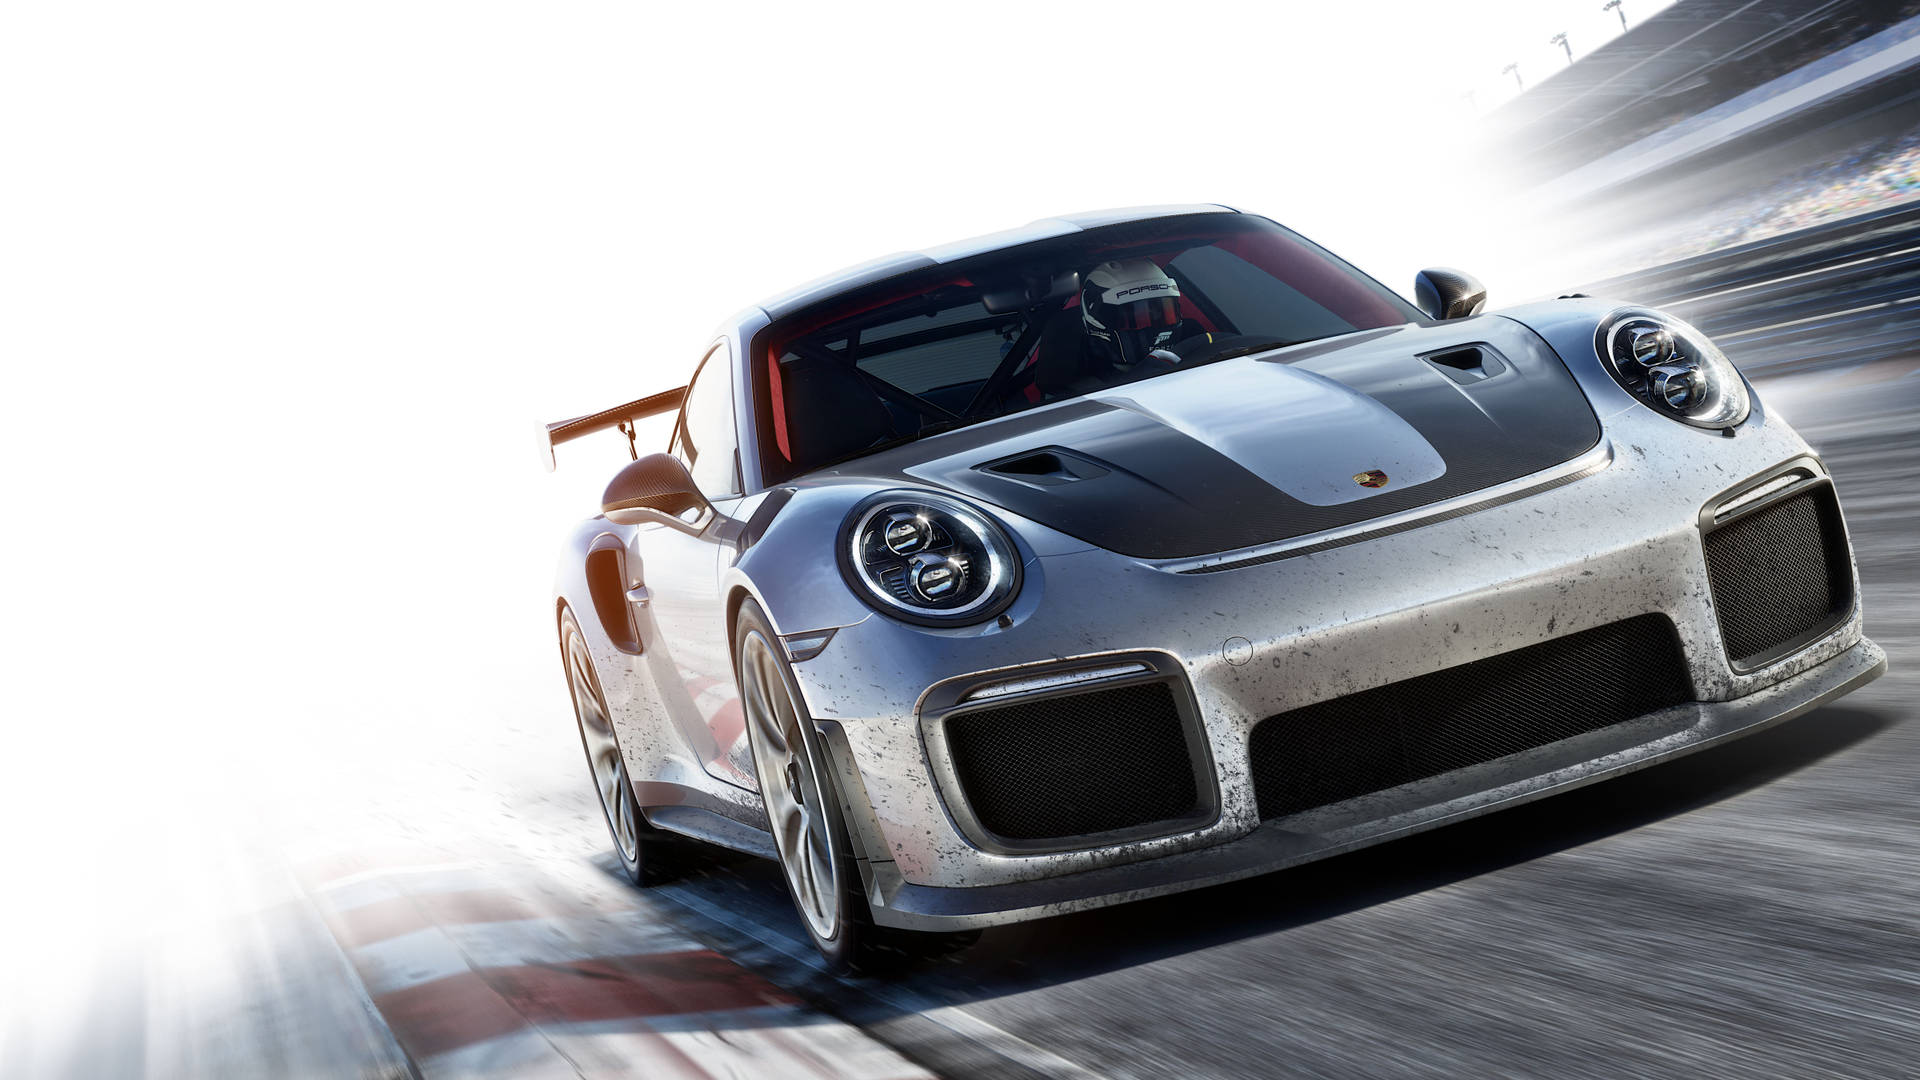 Get On Track with this Amazing Forza Car Wallpaper